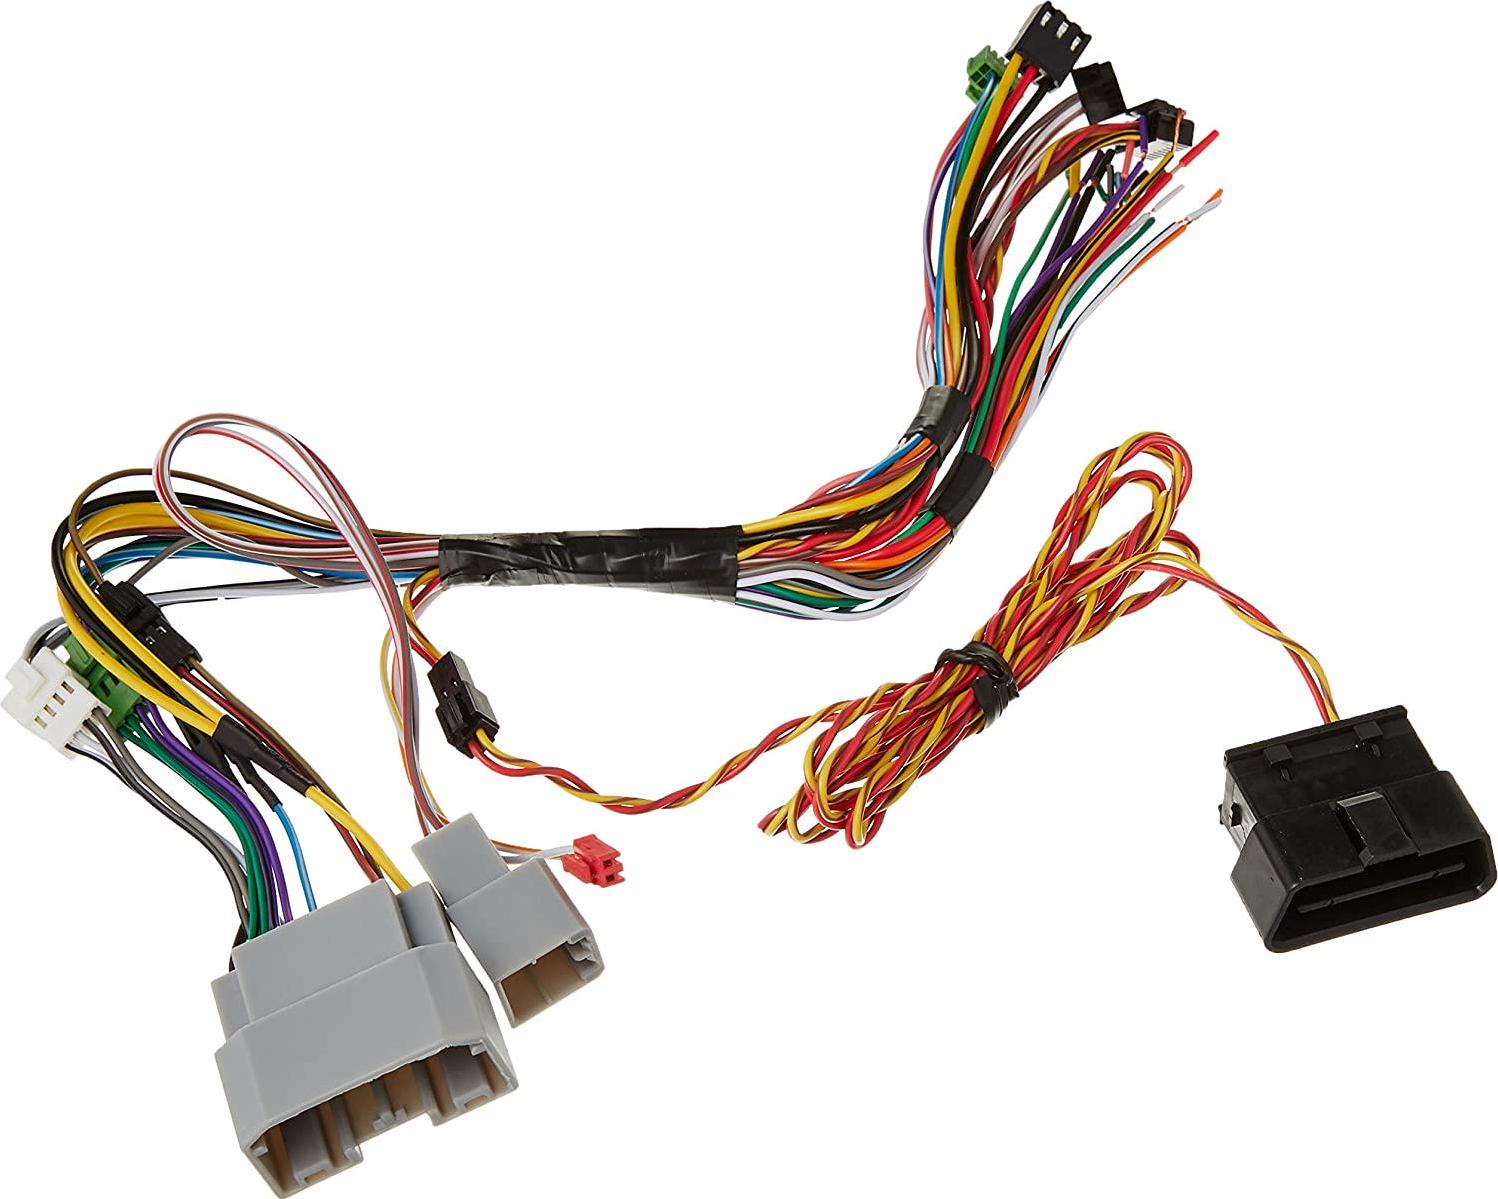 Maestro, Maestro HRN-RR-CH1 Plug and Play T-Harness for CH1 Chrysler, Dodge, Jeep Vehicles